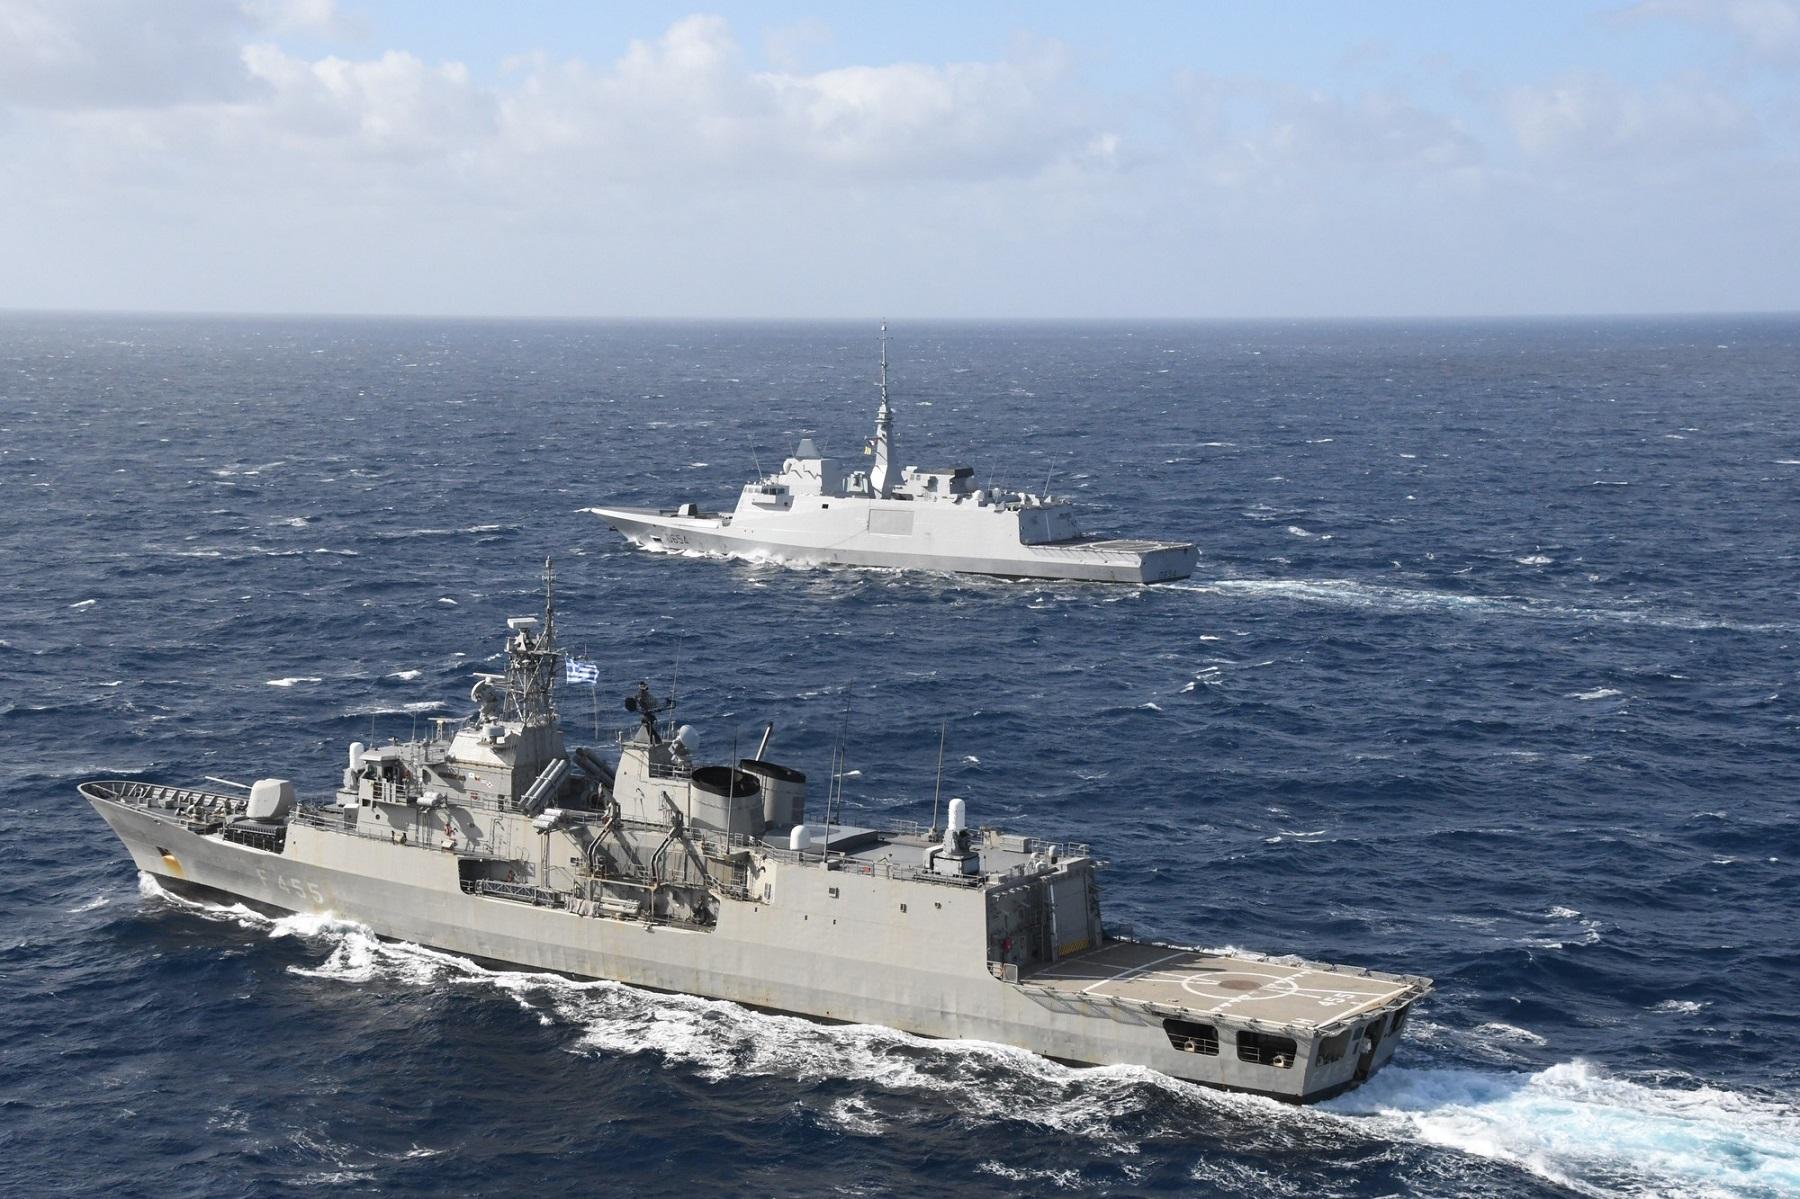 French Navy Frigate Auvergne and Hellenic Navy Frigate Salamis Conduct Joint Drill Off Crete Island